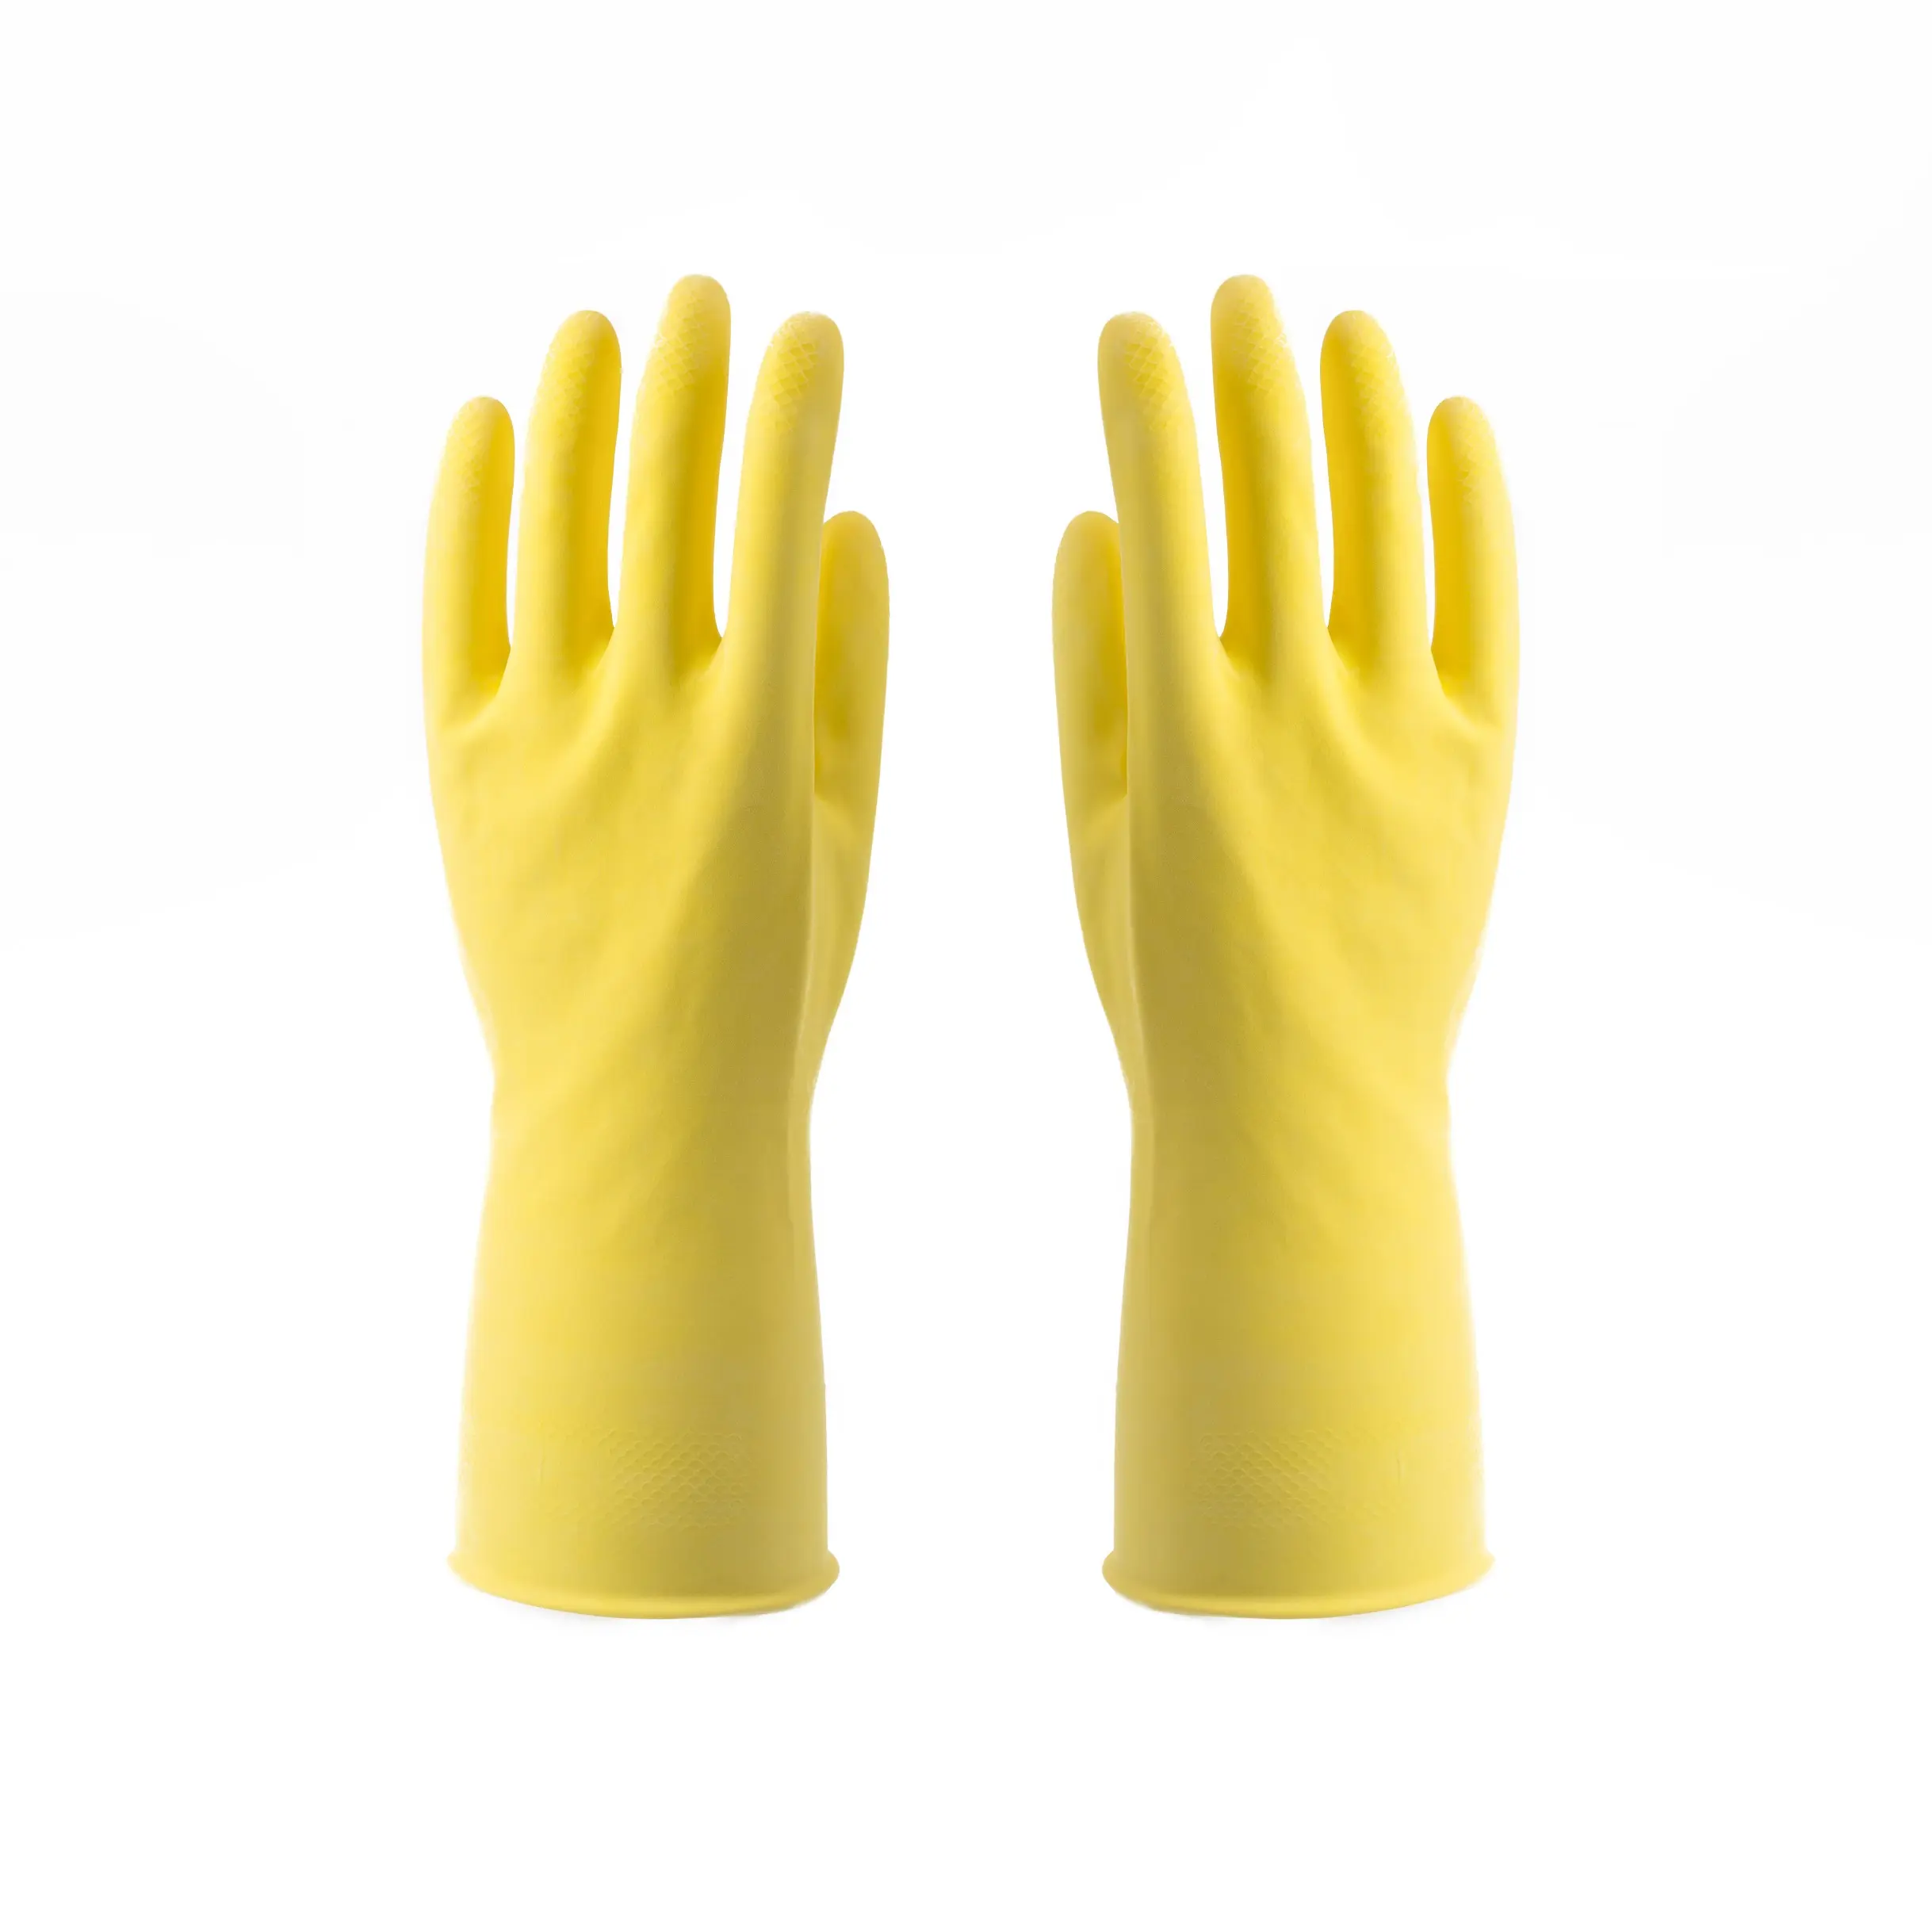 customized reusable dipped cleaning household gloves for work safety